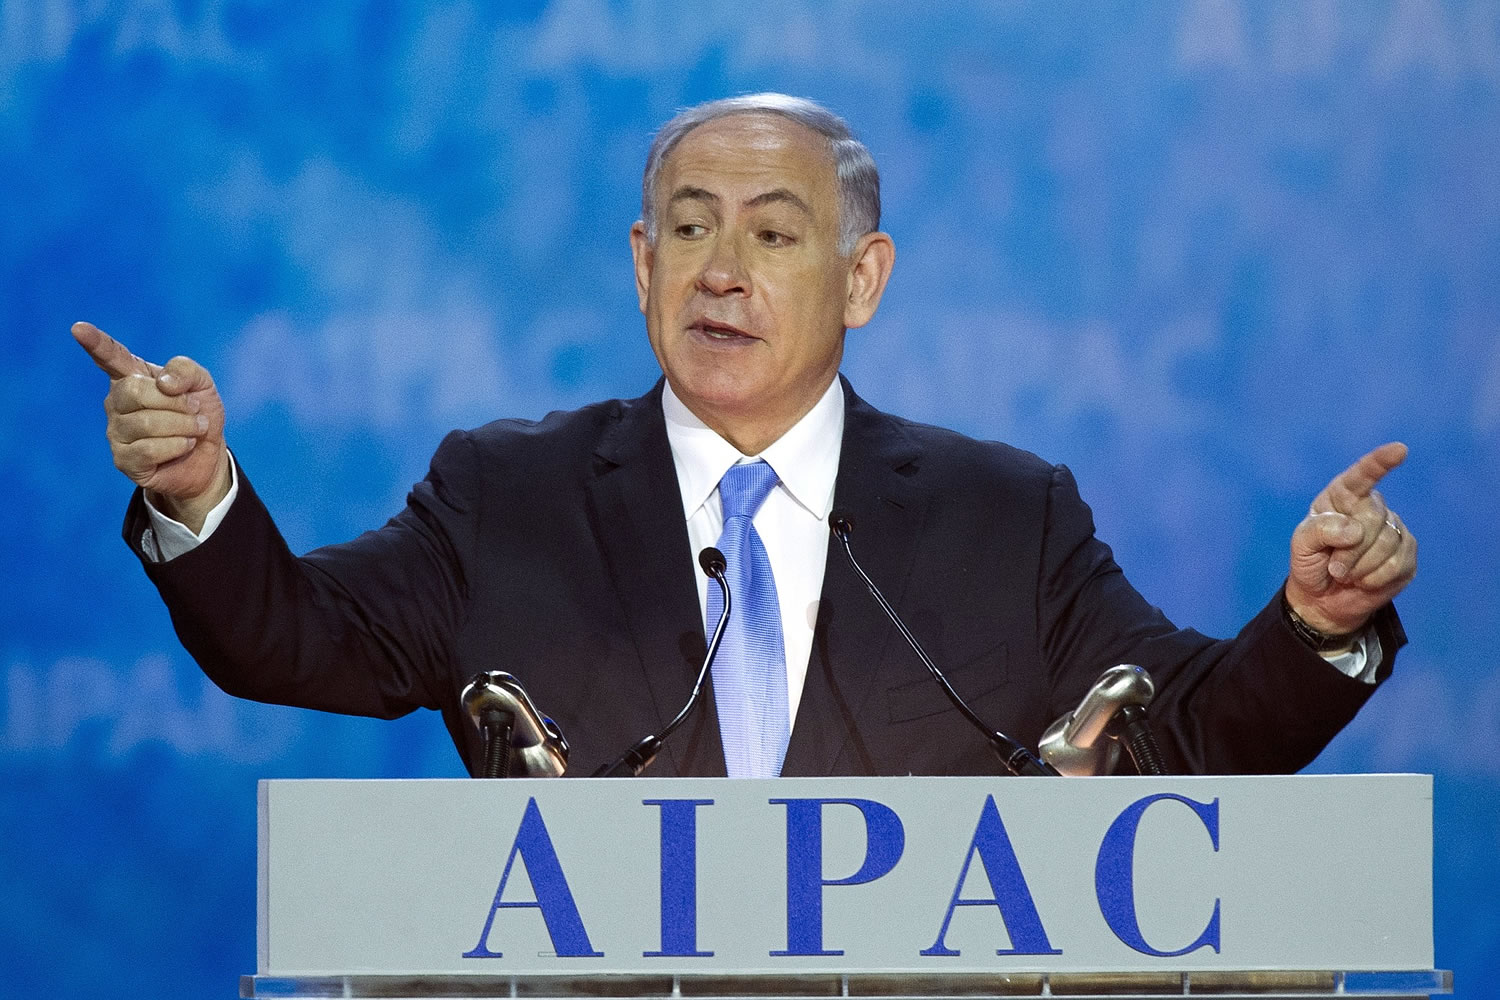 Israeli Prime Minister Benjamin Netanyahu gestures while speaking at the 2015 American Israel Public Affairs Committee Policy Conference in Washington on Monday.